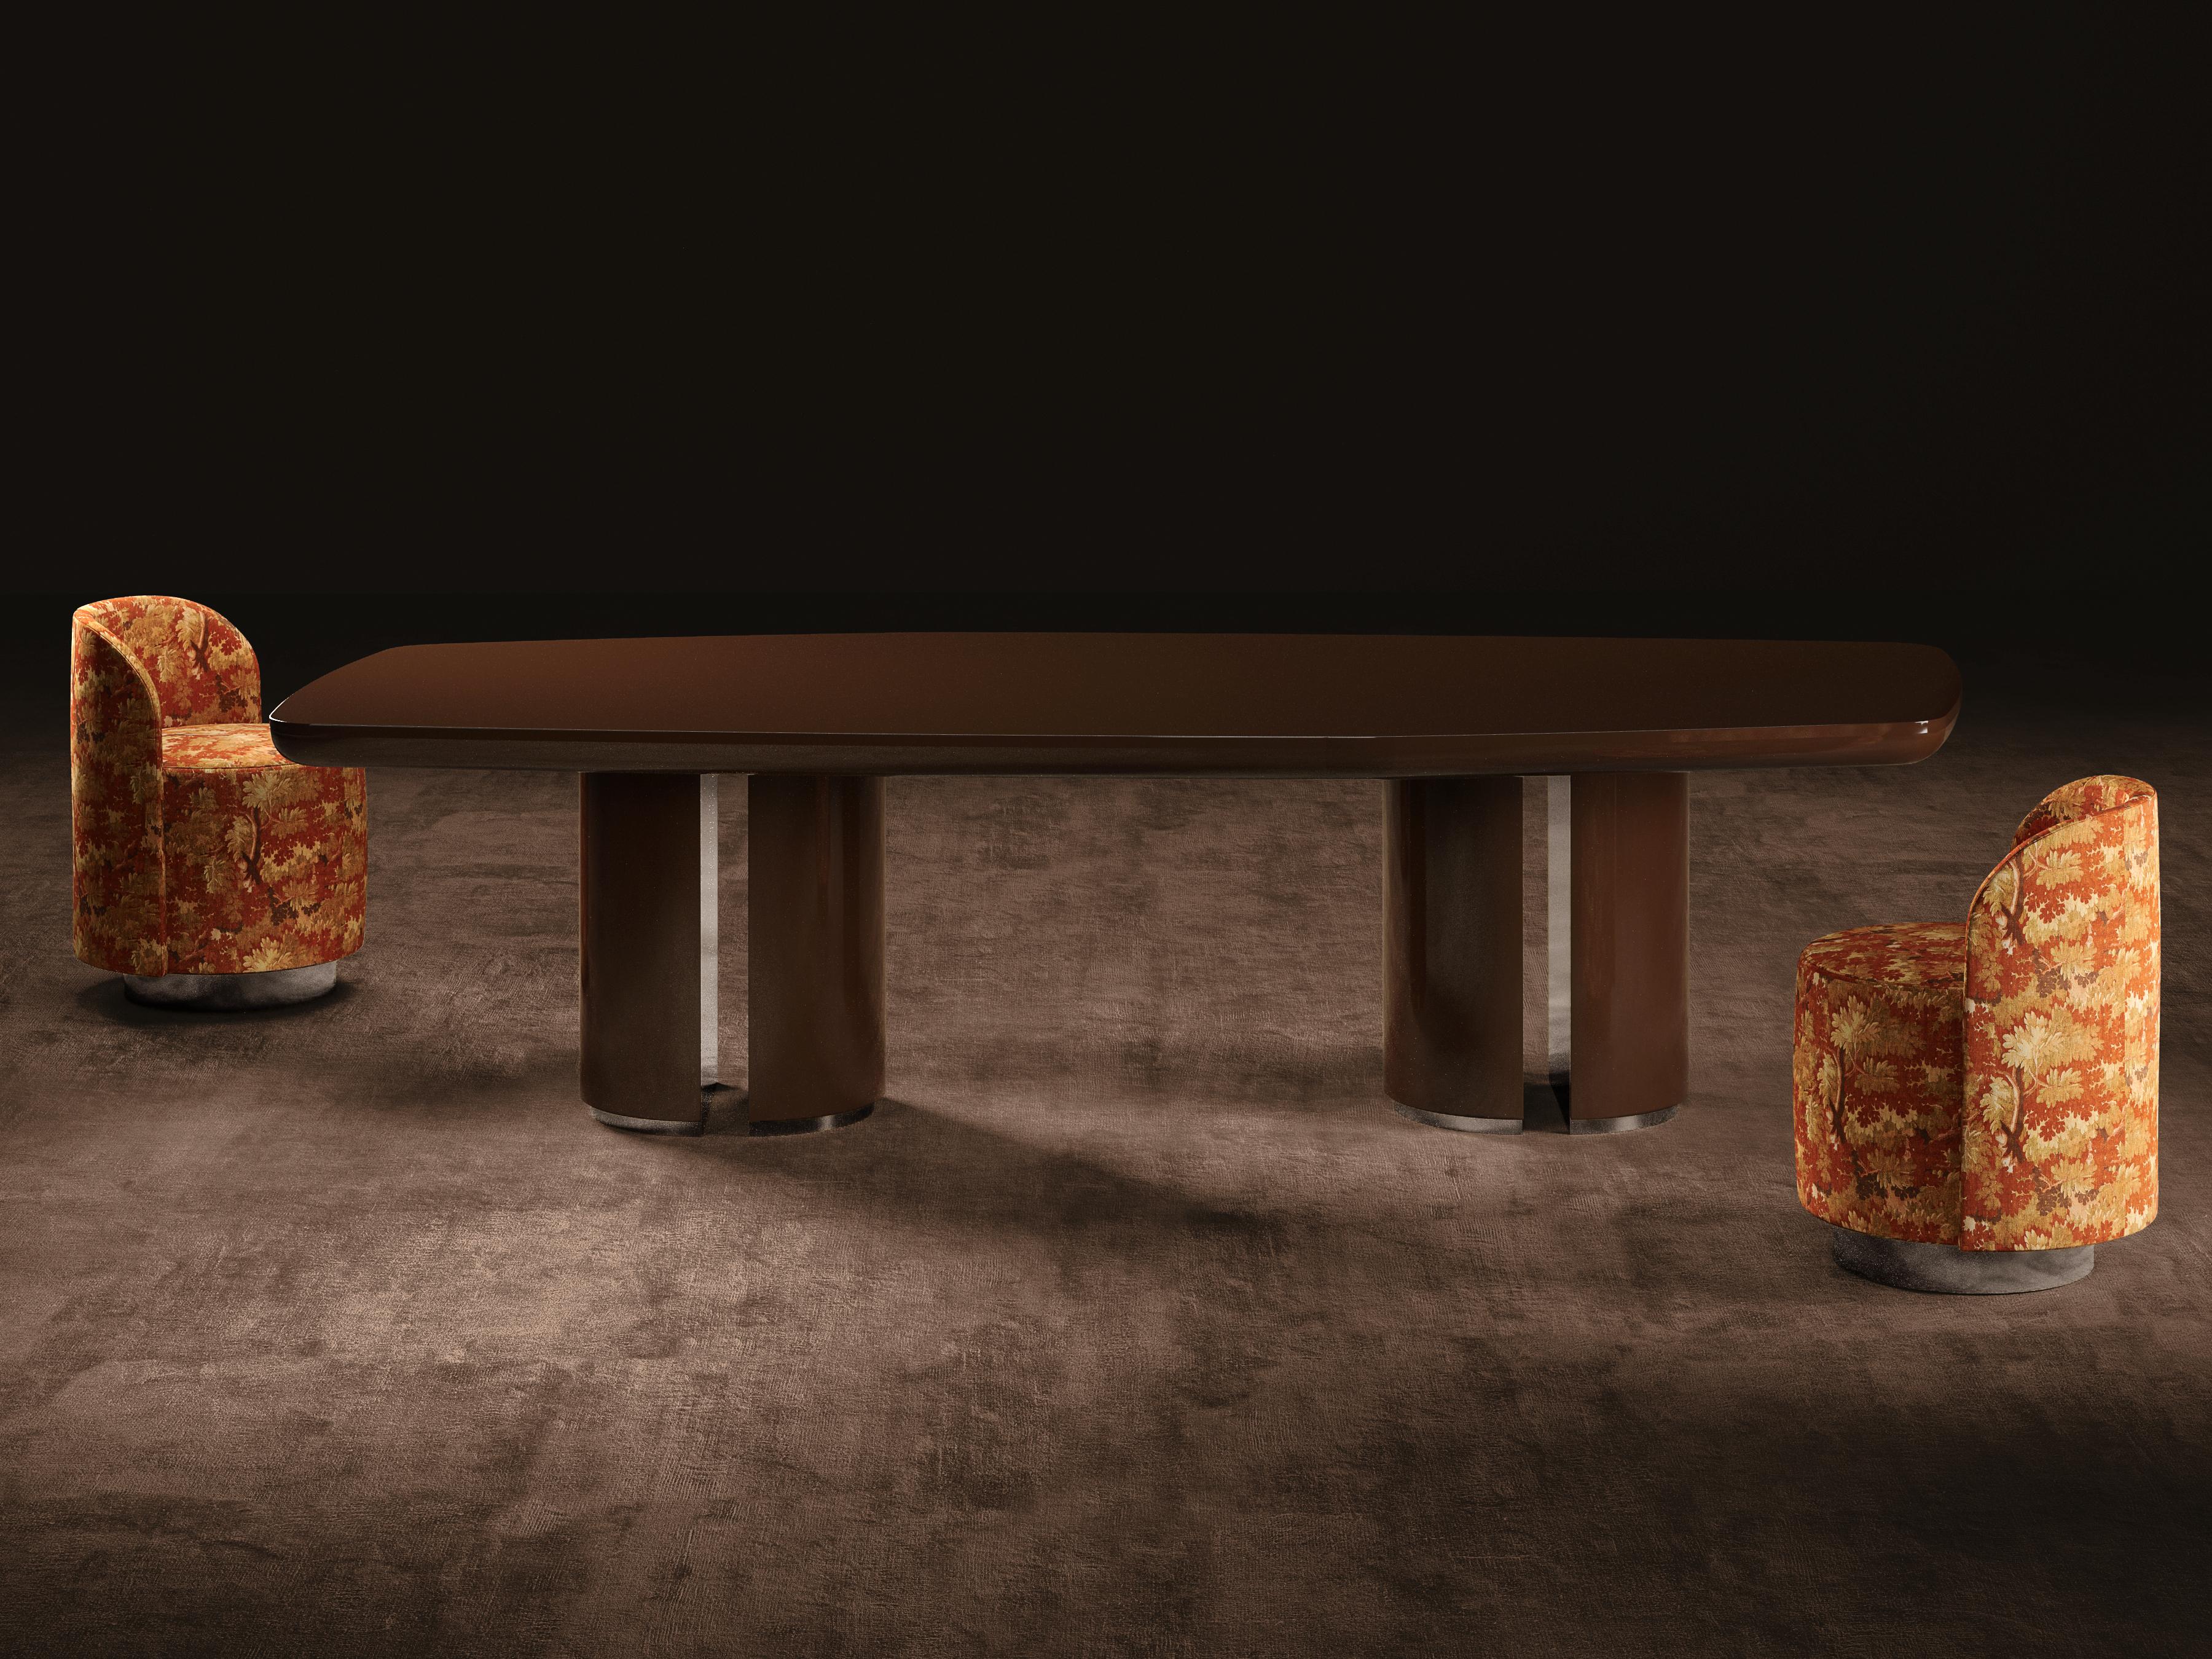 A day in the life dining table is made of a lacquered lightened wood top, connected to the legs by two metal plates. The legs, each made up of two semi-cylindrical legs, are made of curved wood lacquered on the outside and metal plates on the inside